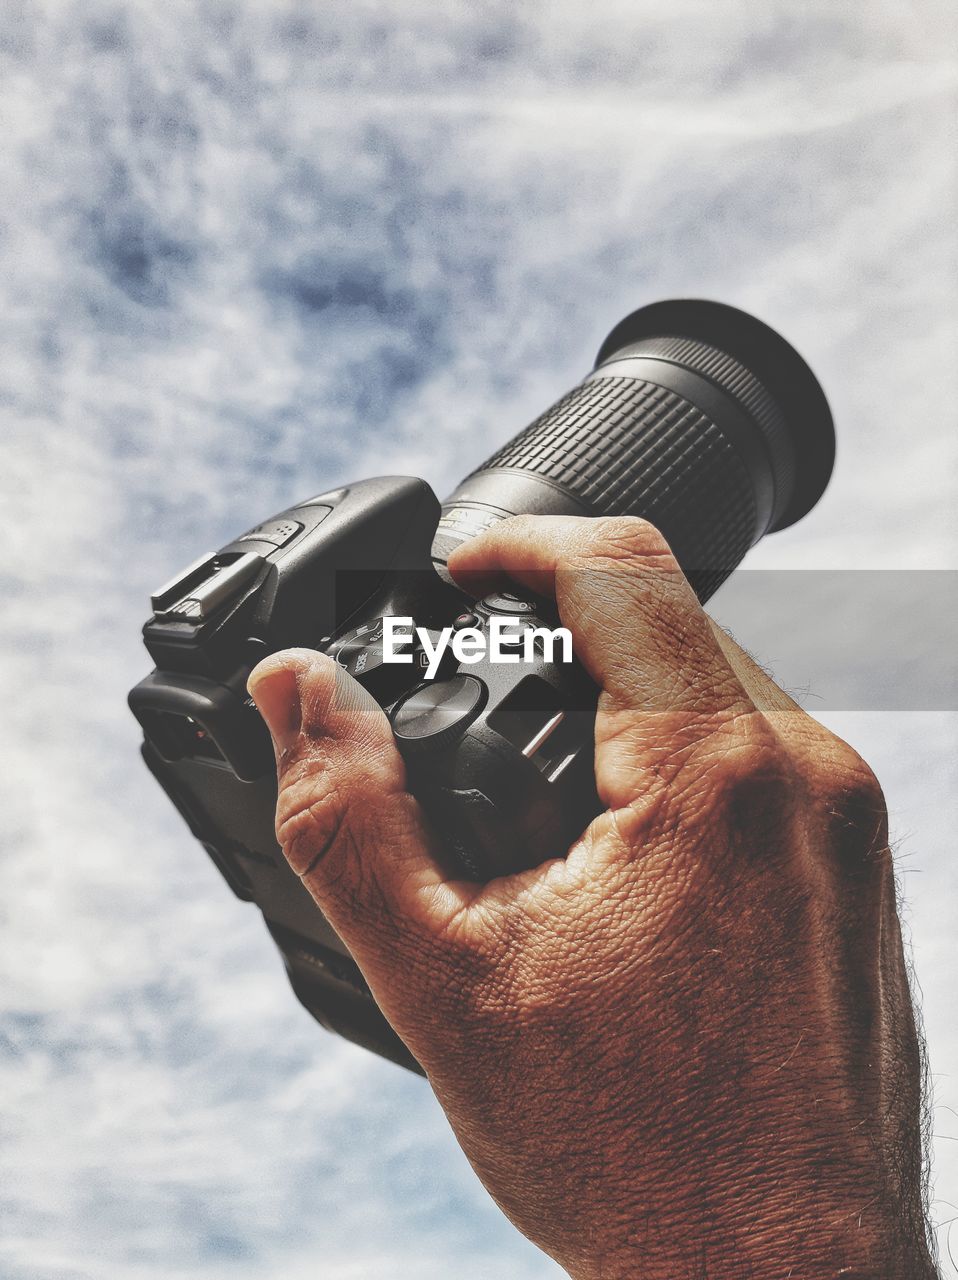 CLOSE-UP OF PERSON HOLDING CAMERA AGAINST SKY